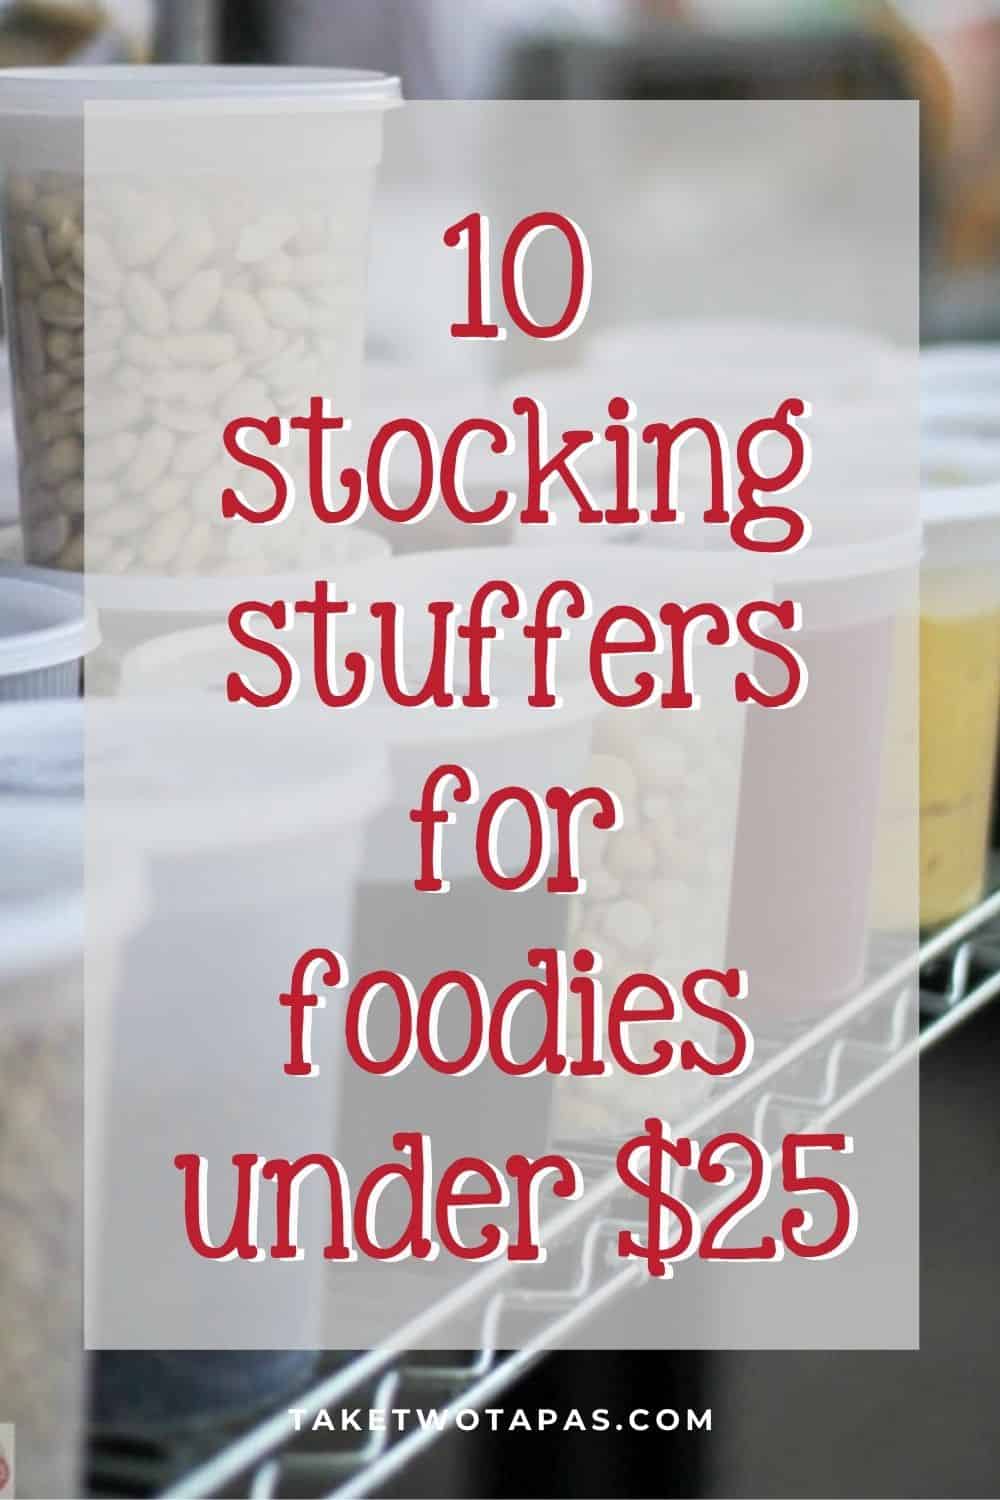 blurred picture with text "15 stocking stuffers for foodies under $25